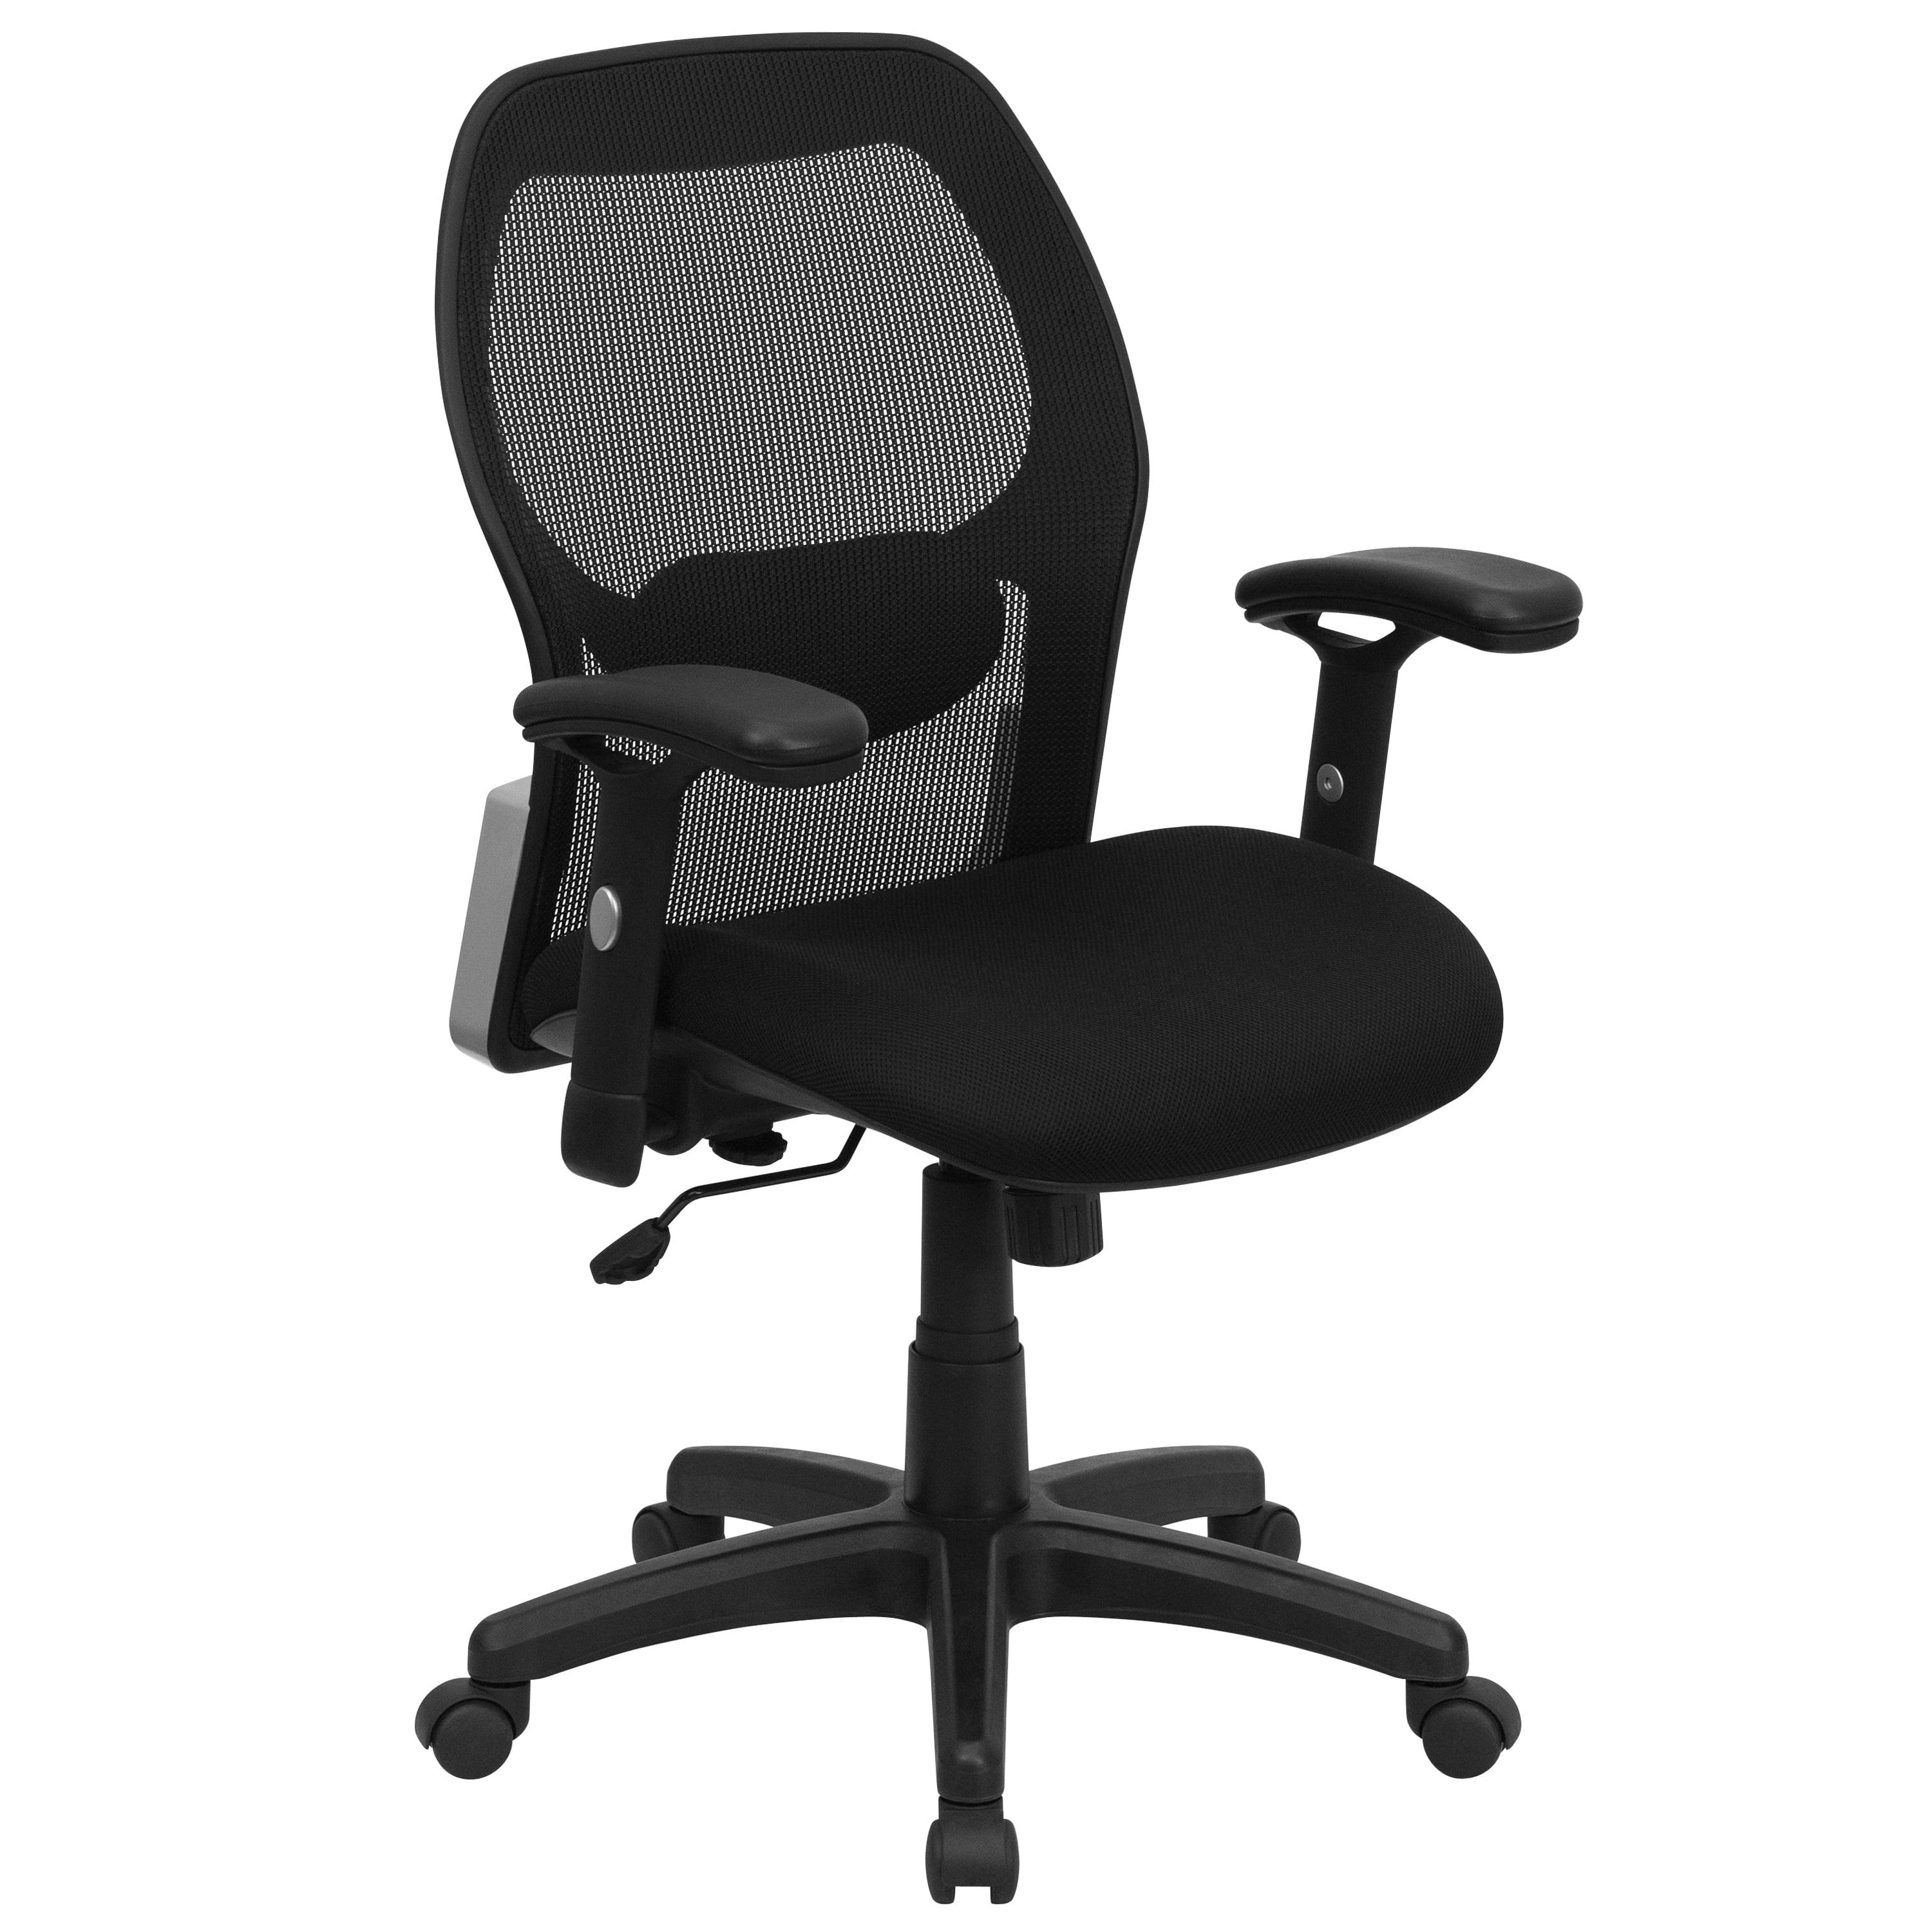 Ergonomic Mid-Back Black Mesh Executive Swivel Chair with Adjustable Arms